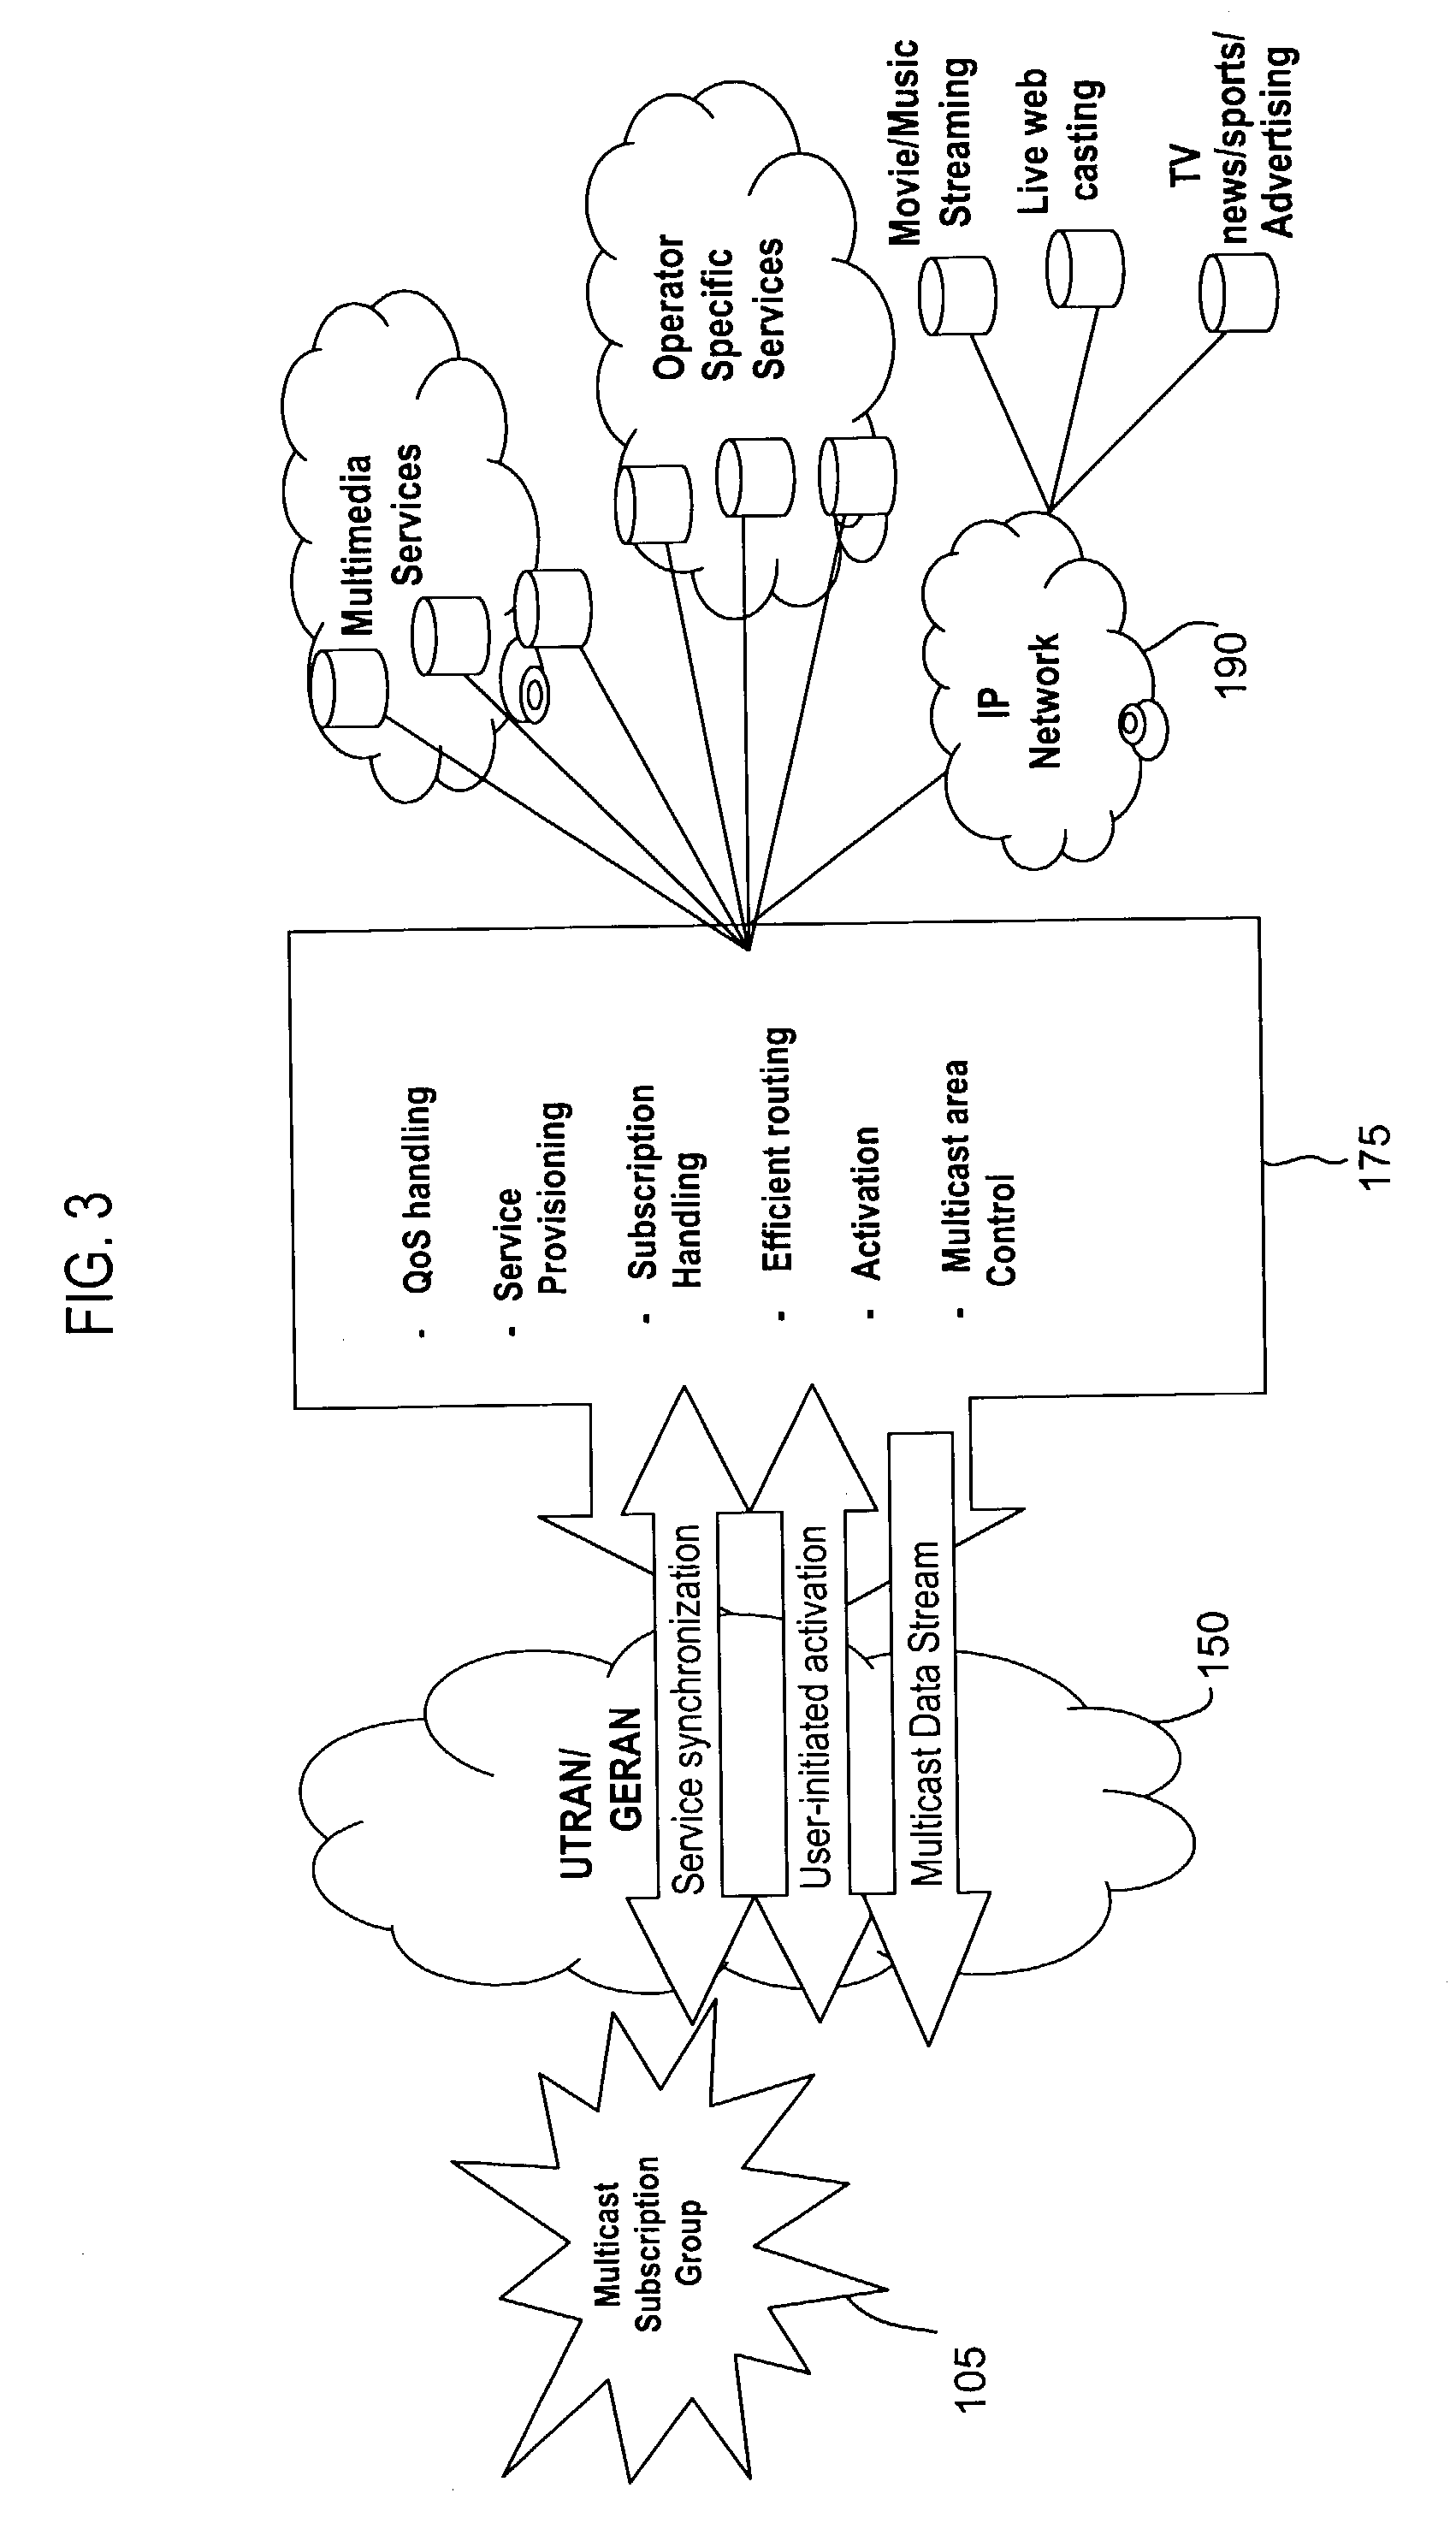 Transmission methods for communication systems supporting a multicast mode